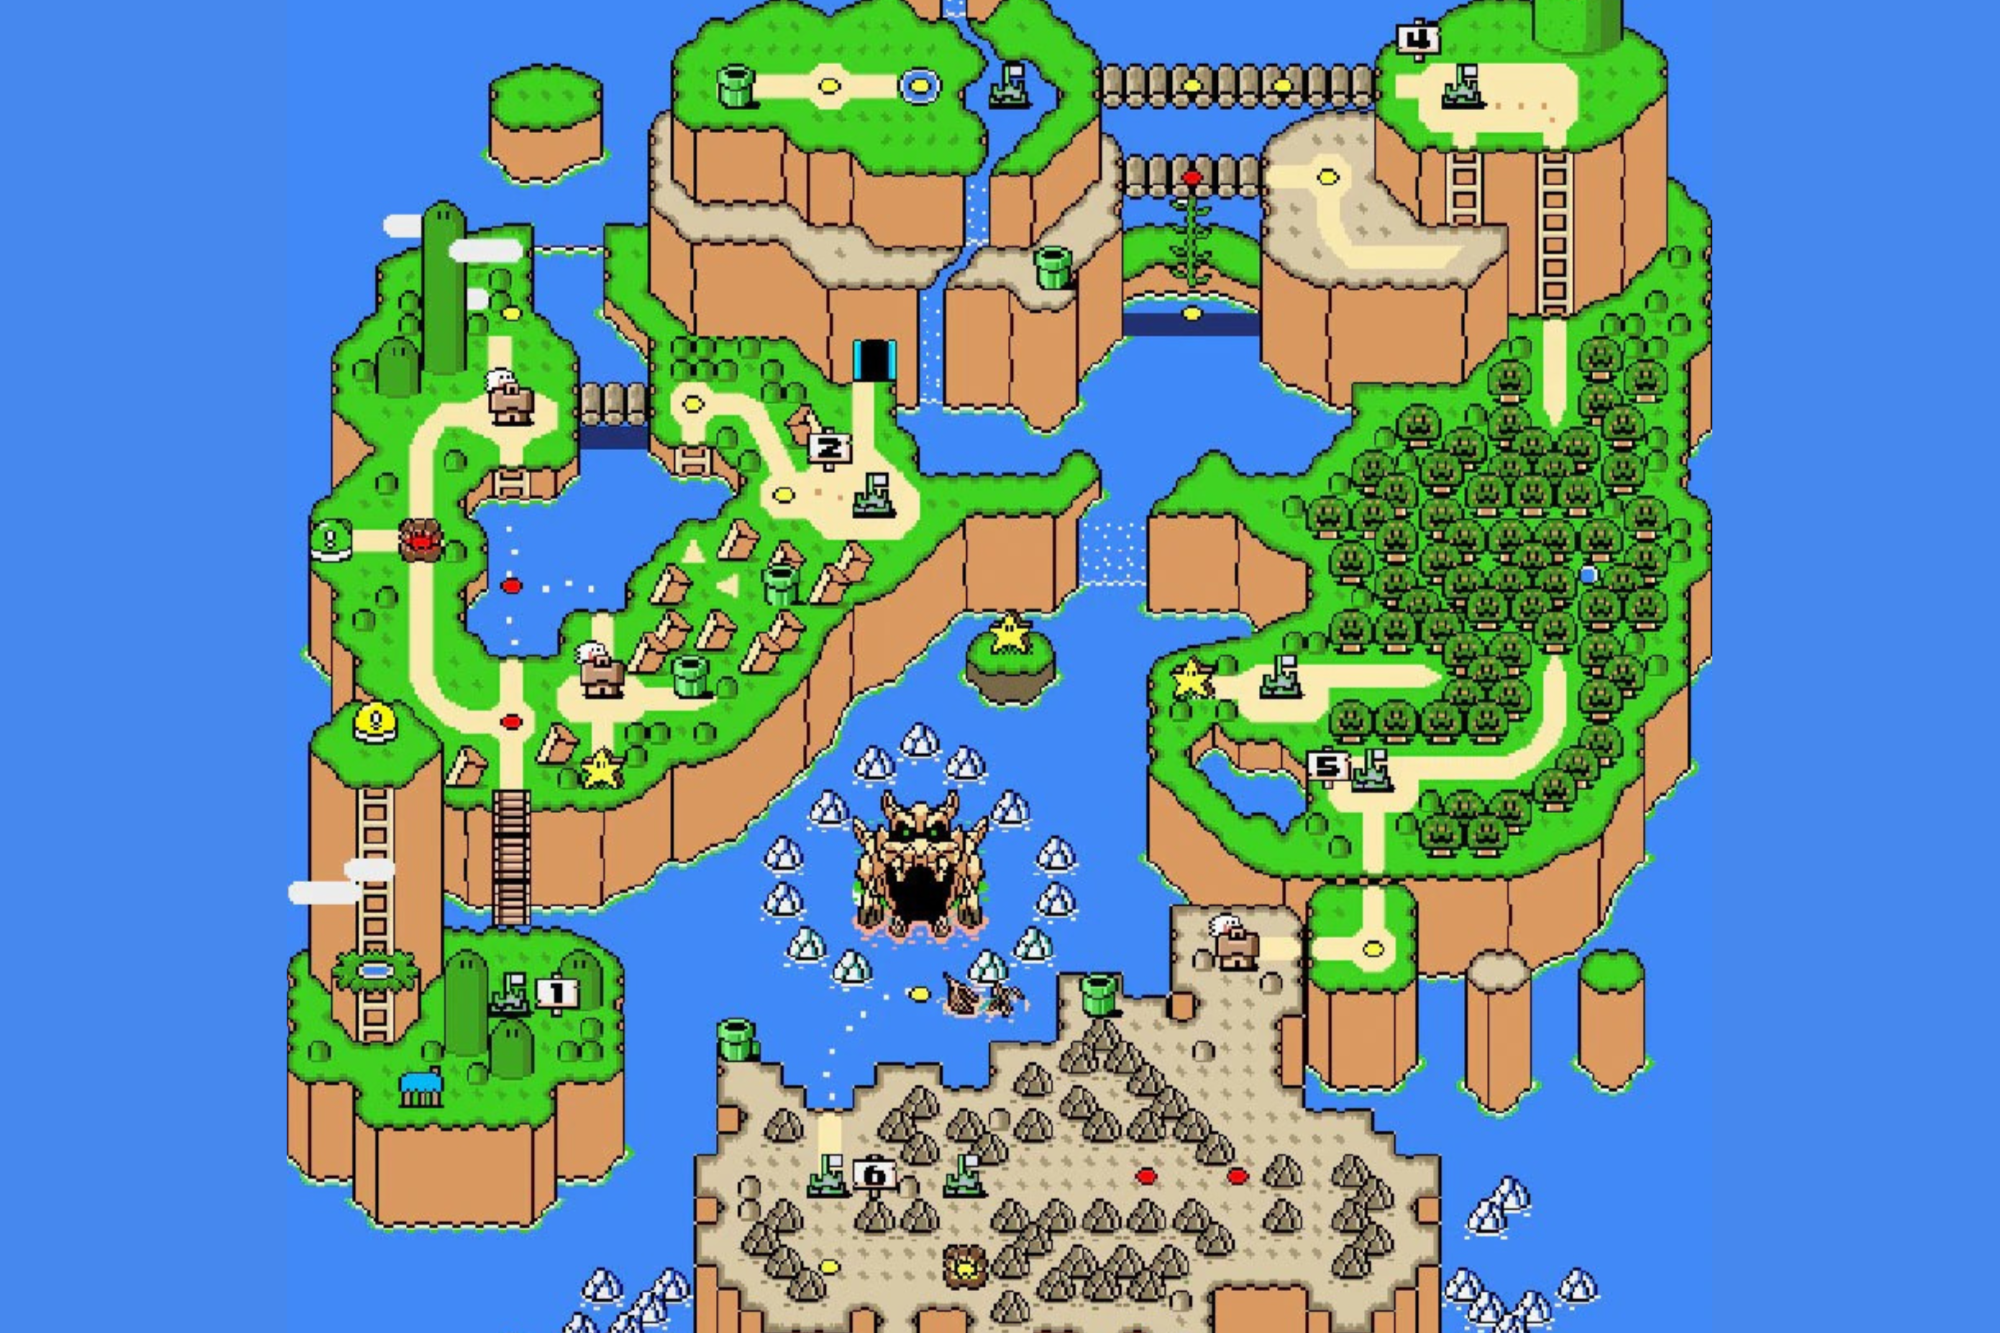 Can You Guess the Video Game Based on the Map?